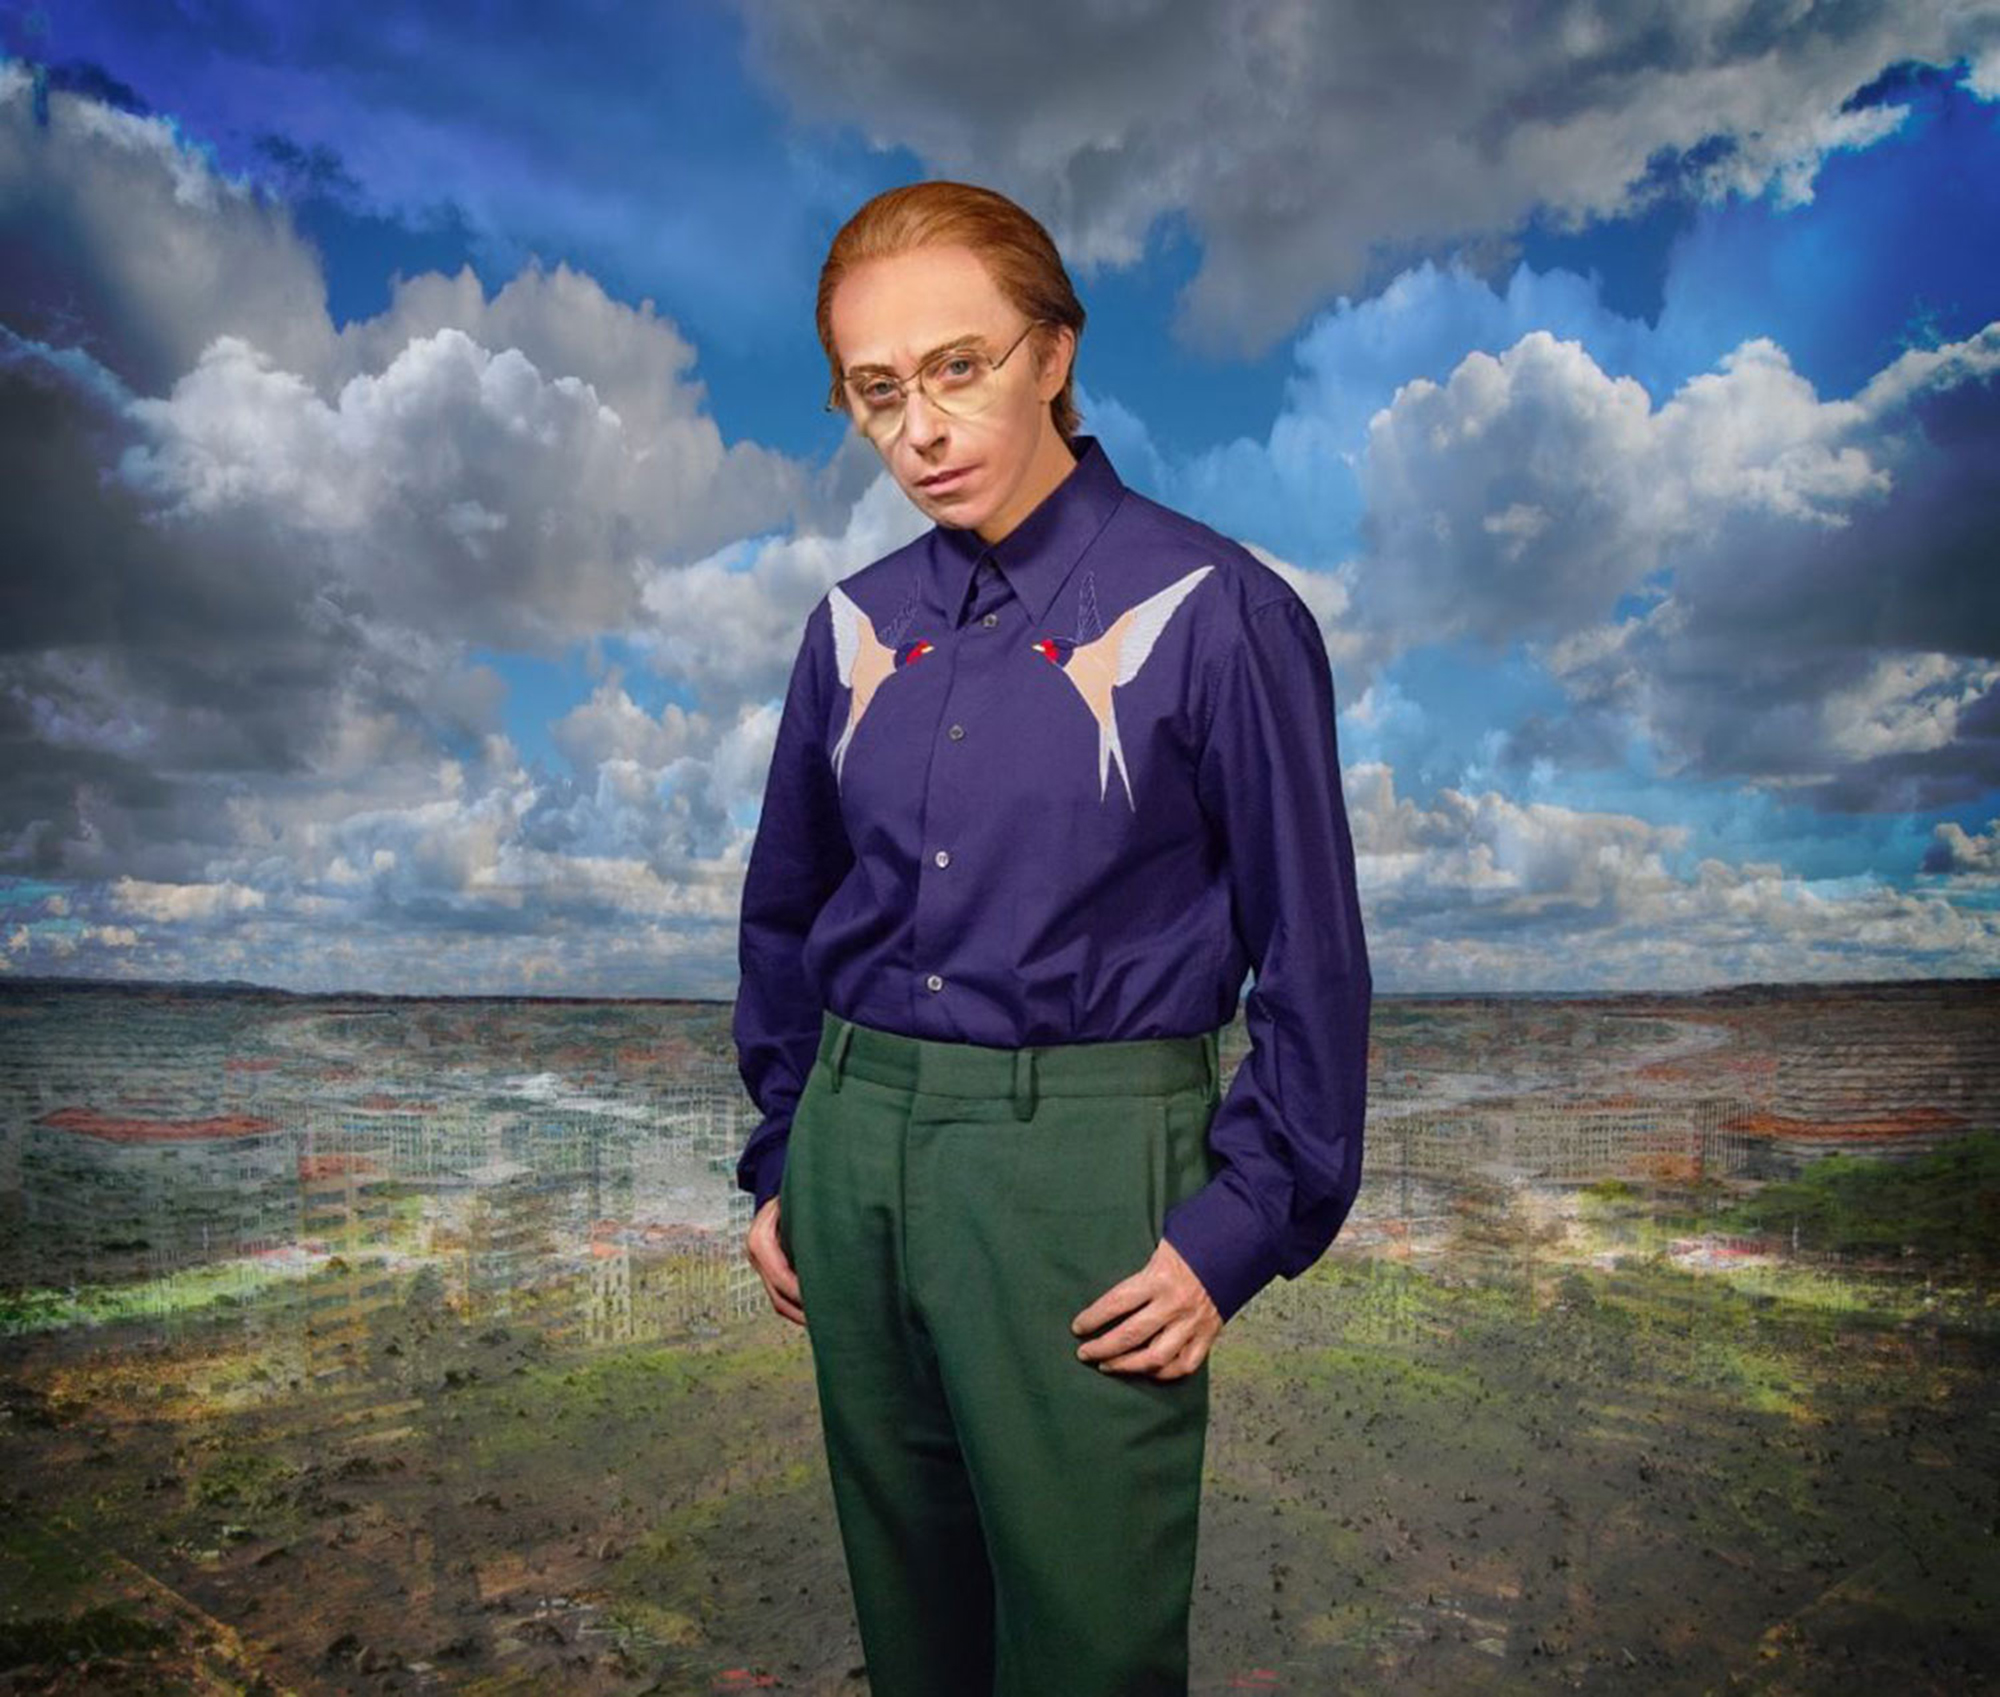 Untitled #611, dye-sublimation print 91 x 107 1/4 inches 231.1 x 272.4 cm © Cindy Sherman 2019 | Image source internet